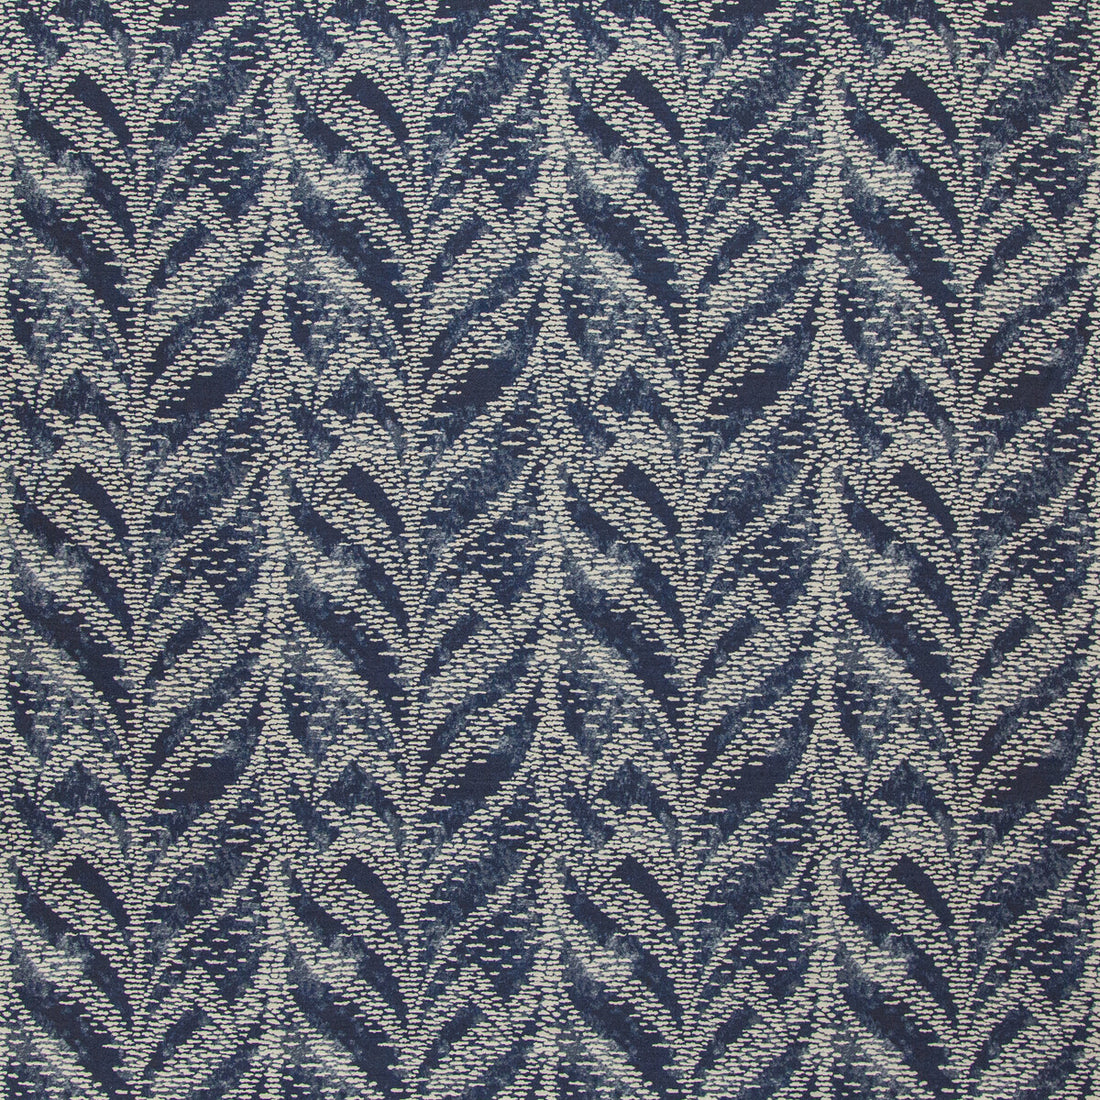 Pompano fabric in navy color - pattern 35818.50.0 - by Kravet Design in the Indoor / Outdoor collection